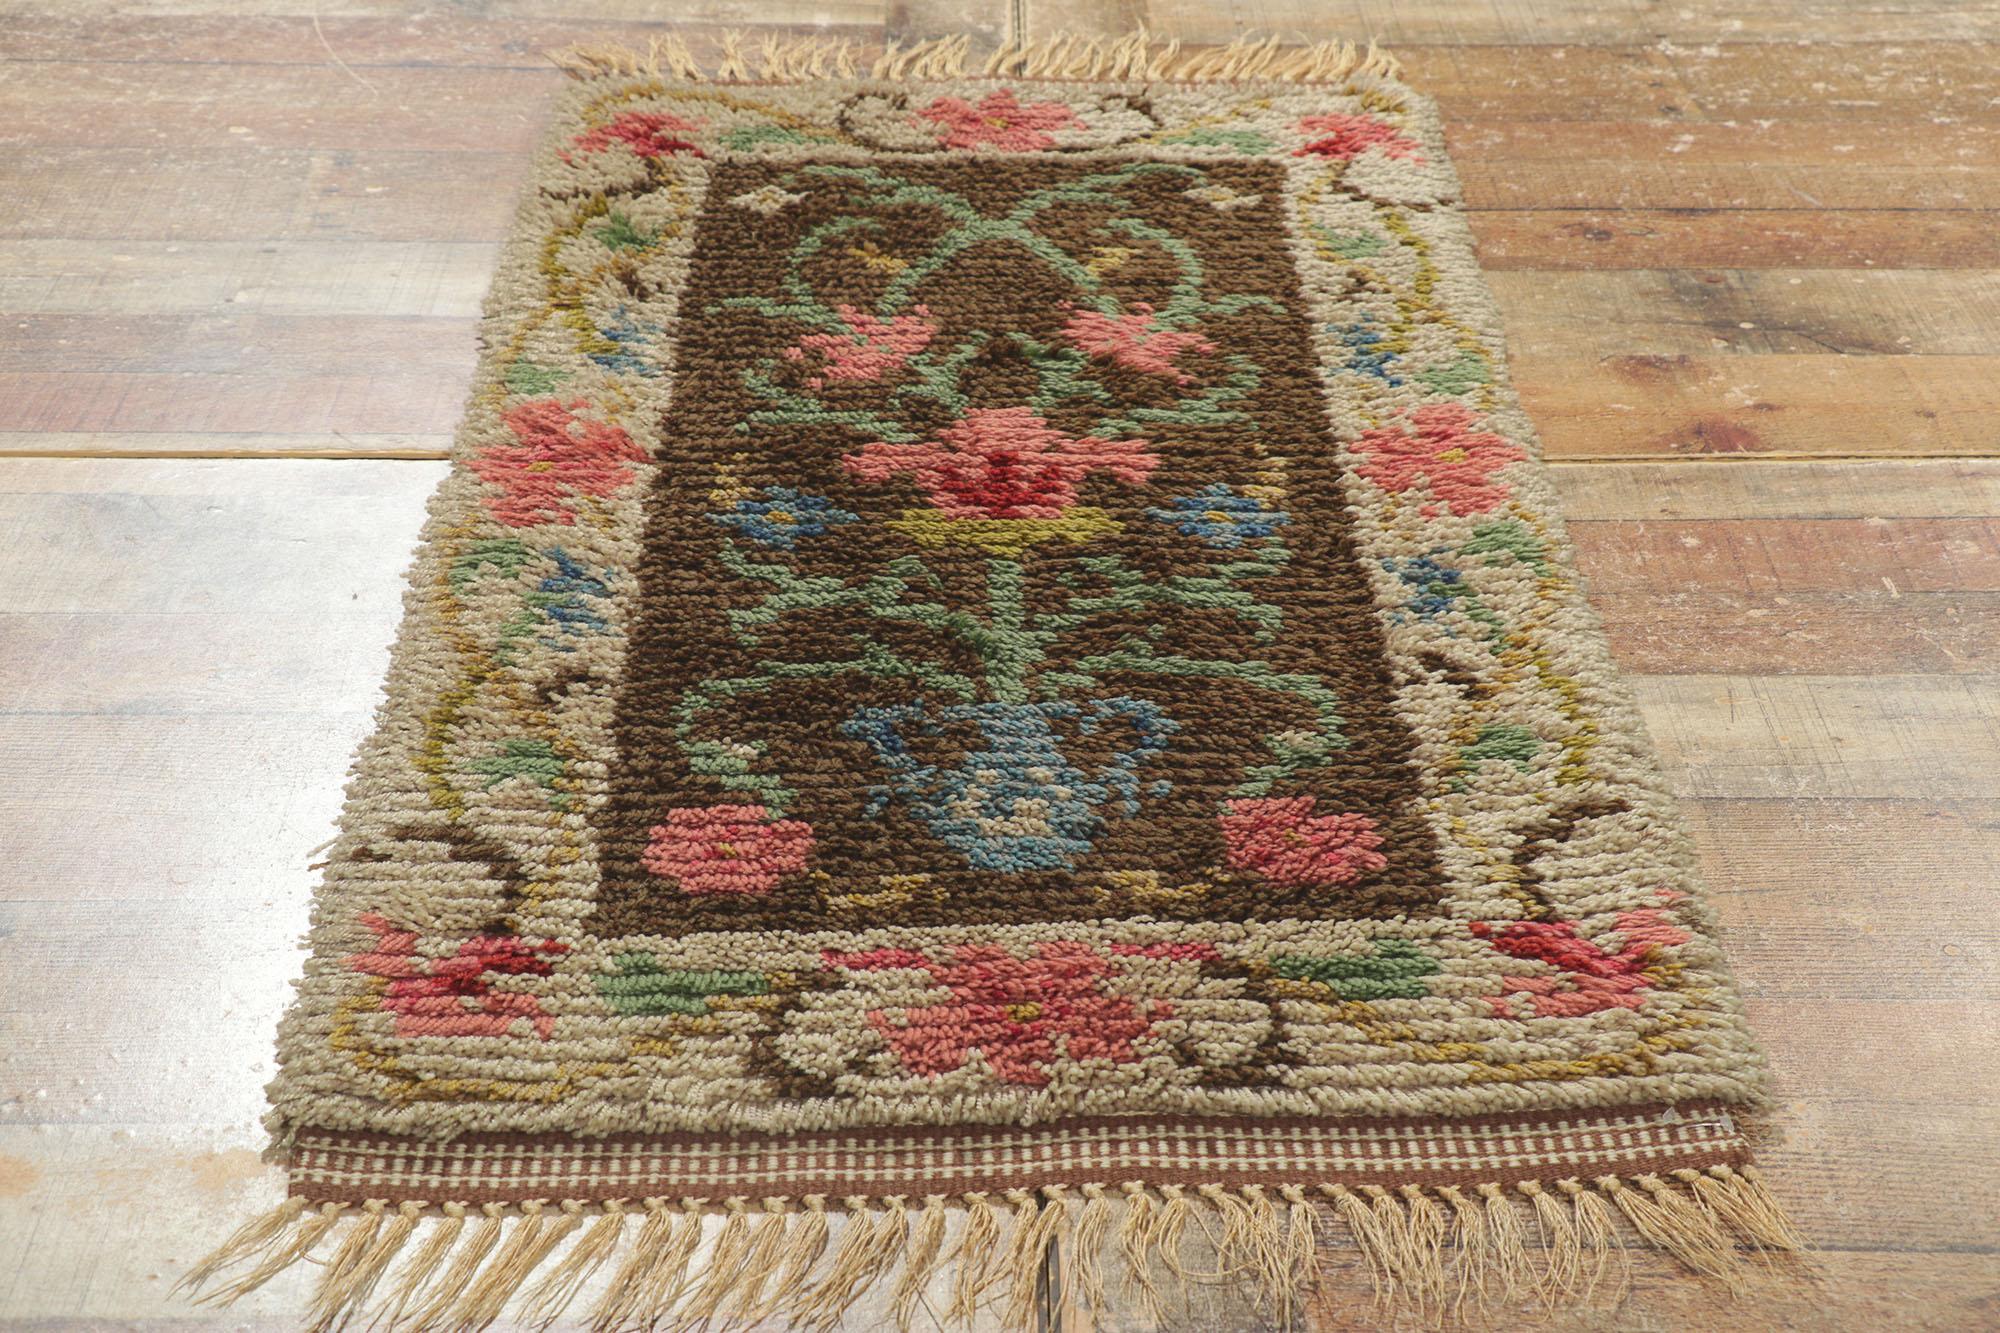 Vintage Finnish Ryijy Rya Rug with Scandinavian Modern Folk Art Style  In Good Condition For Sale In Dallas, TX